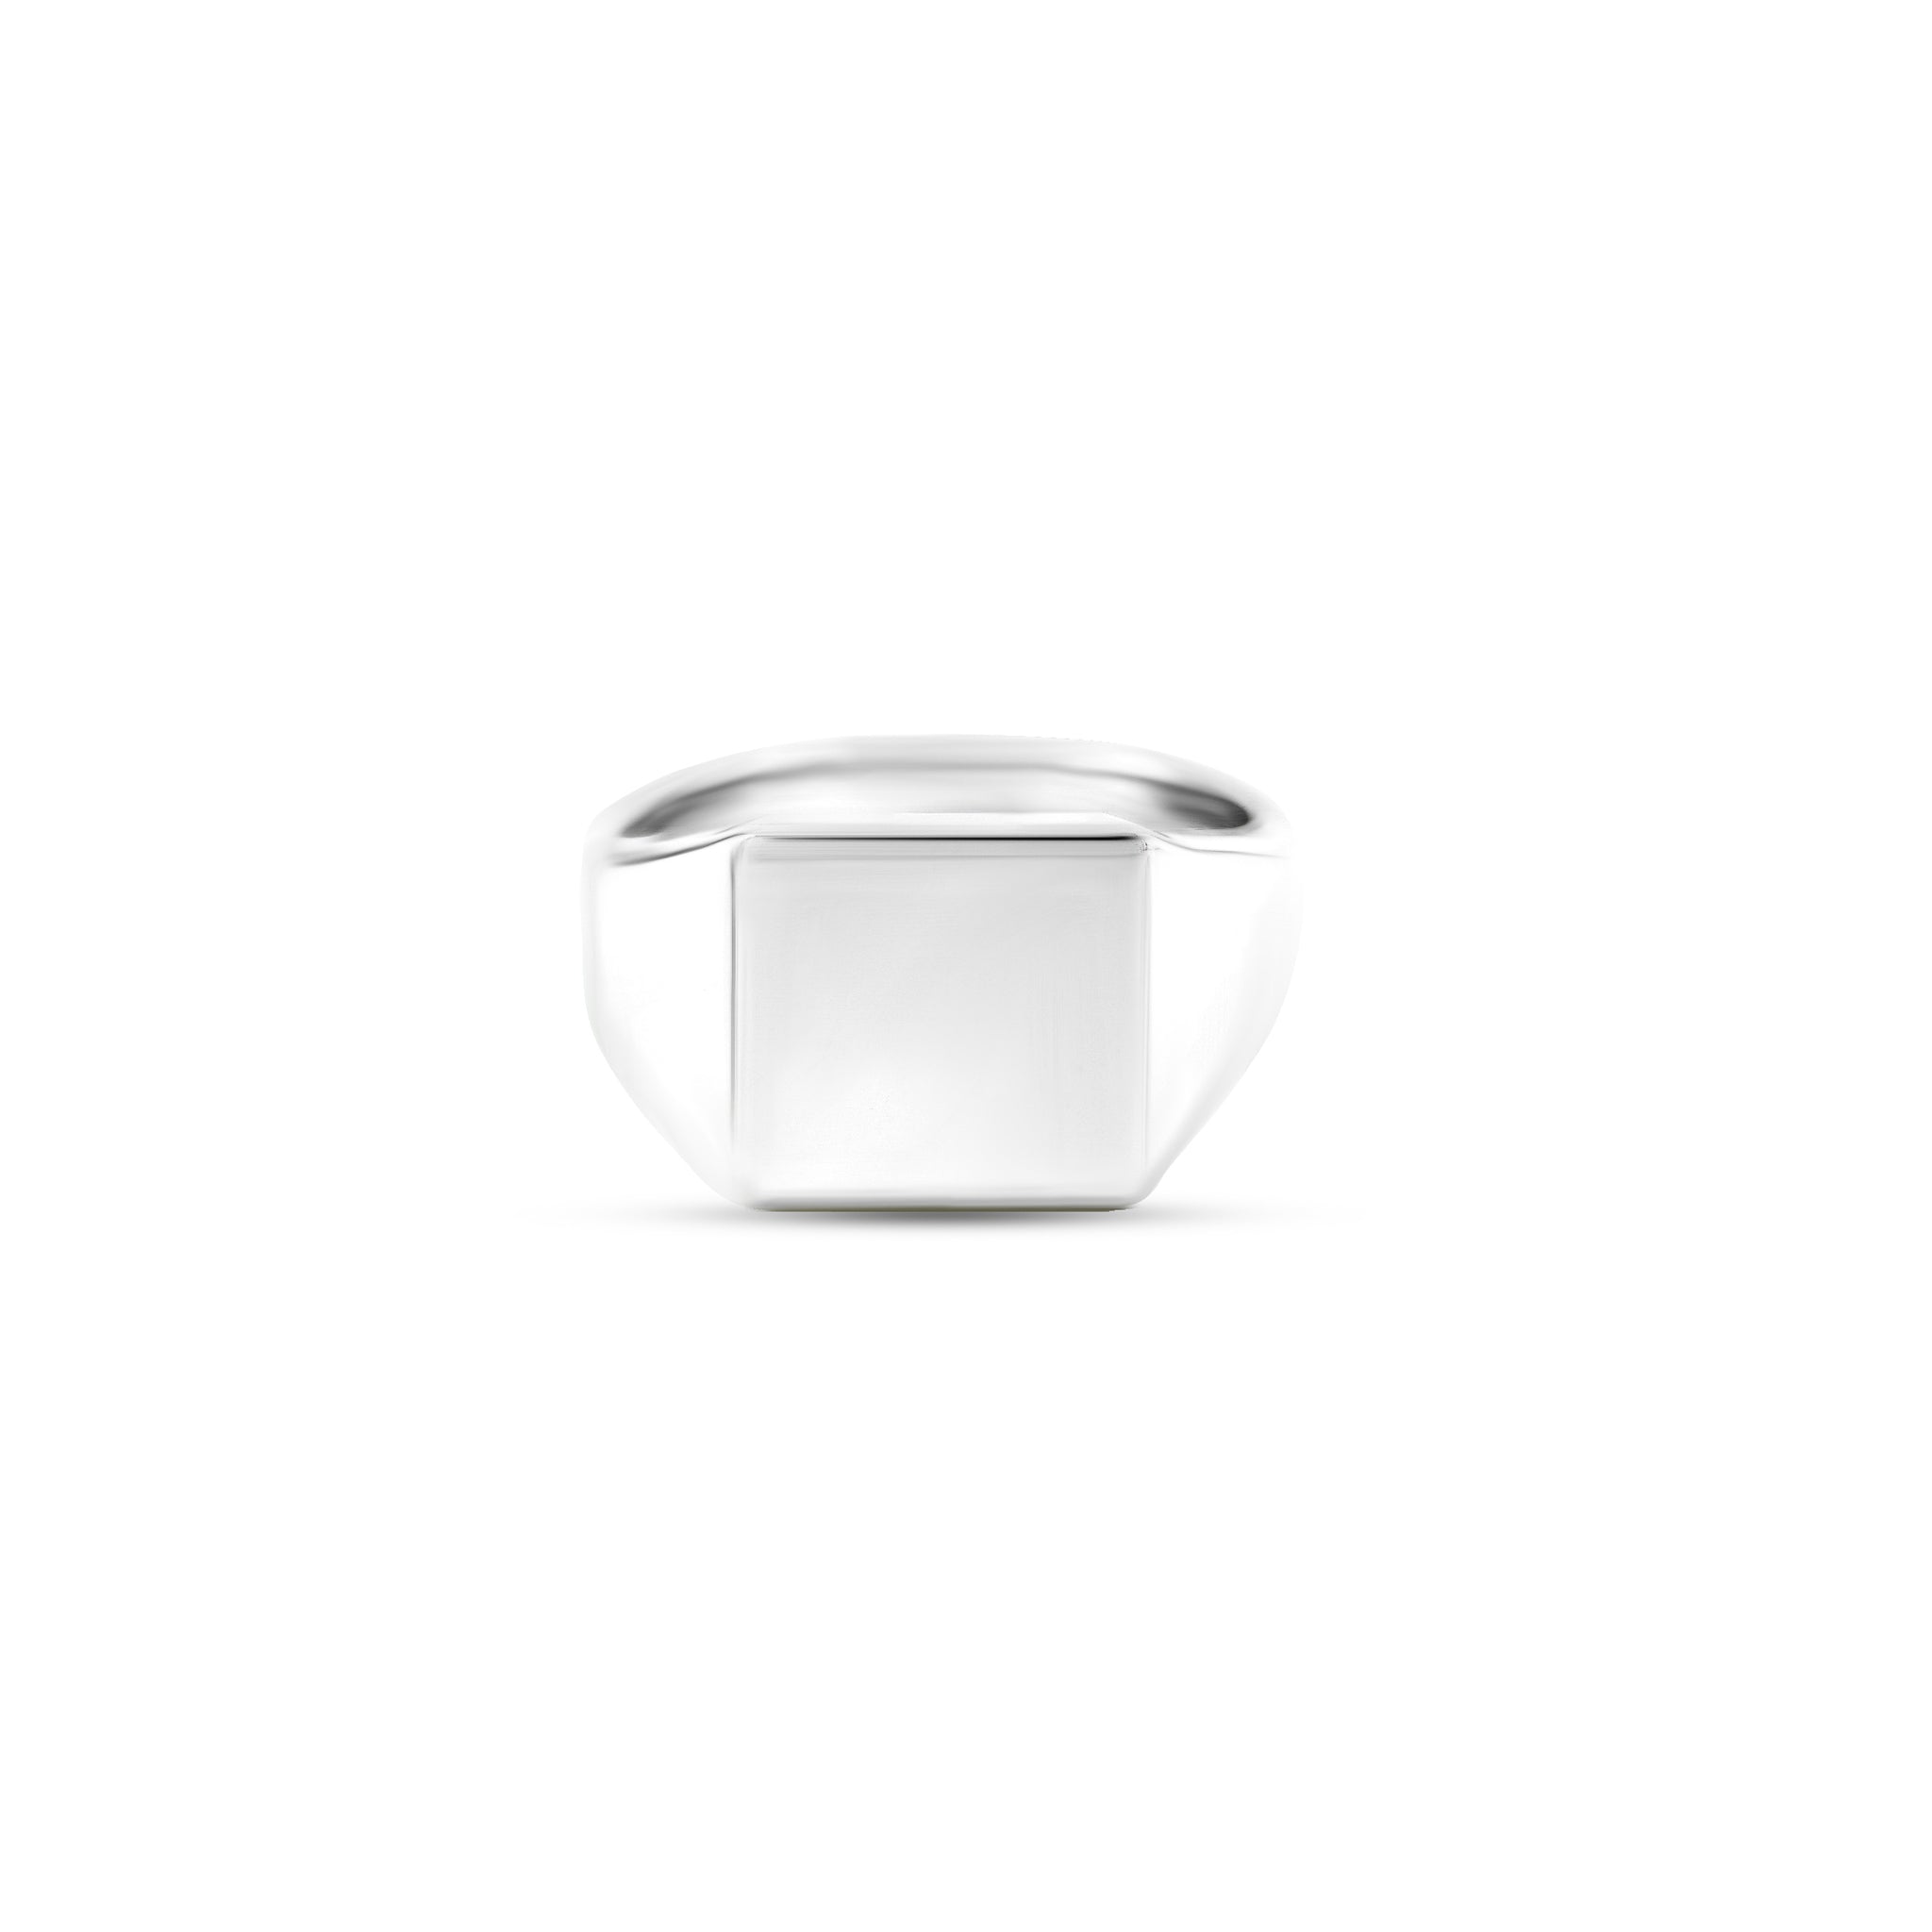 18ct White Gold 12 x 12mm Square Signet Ring